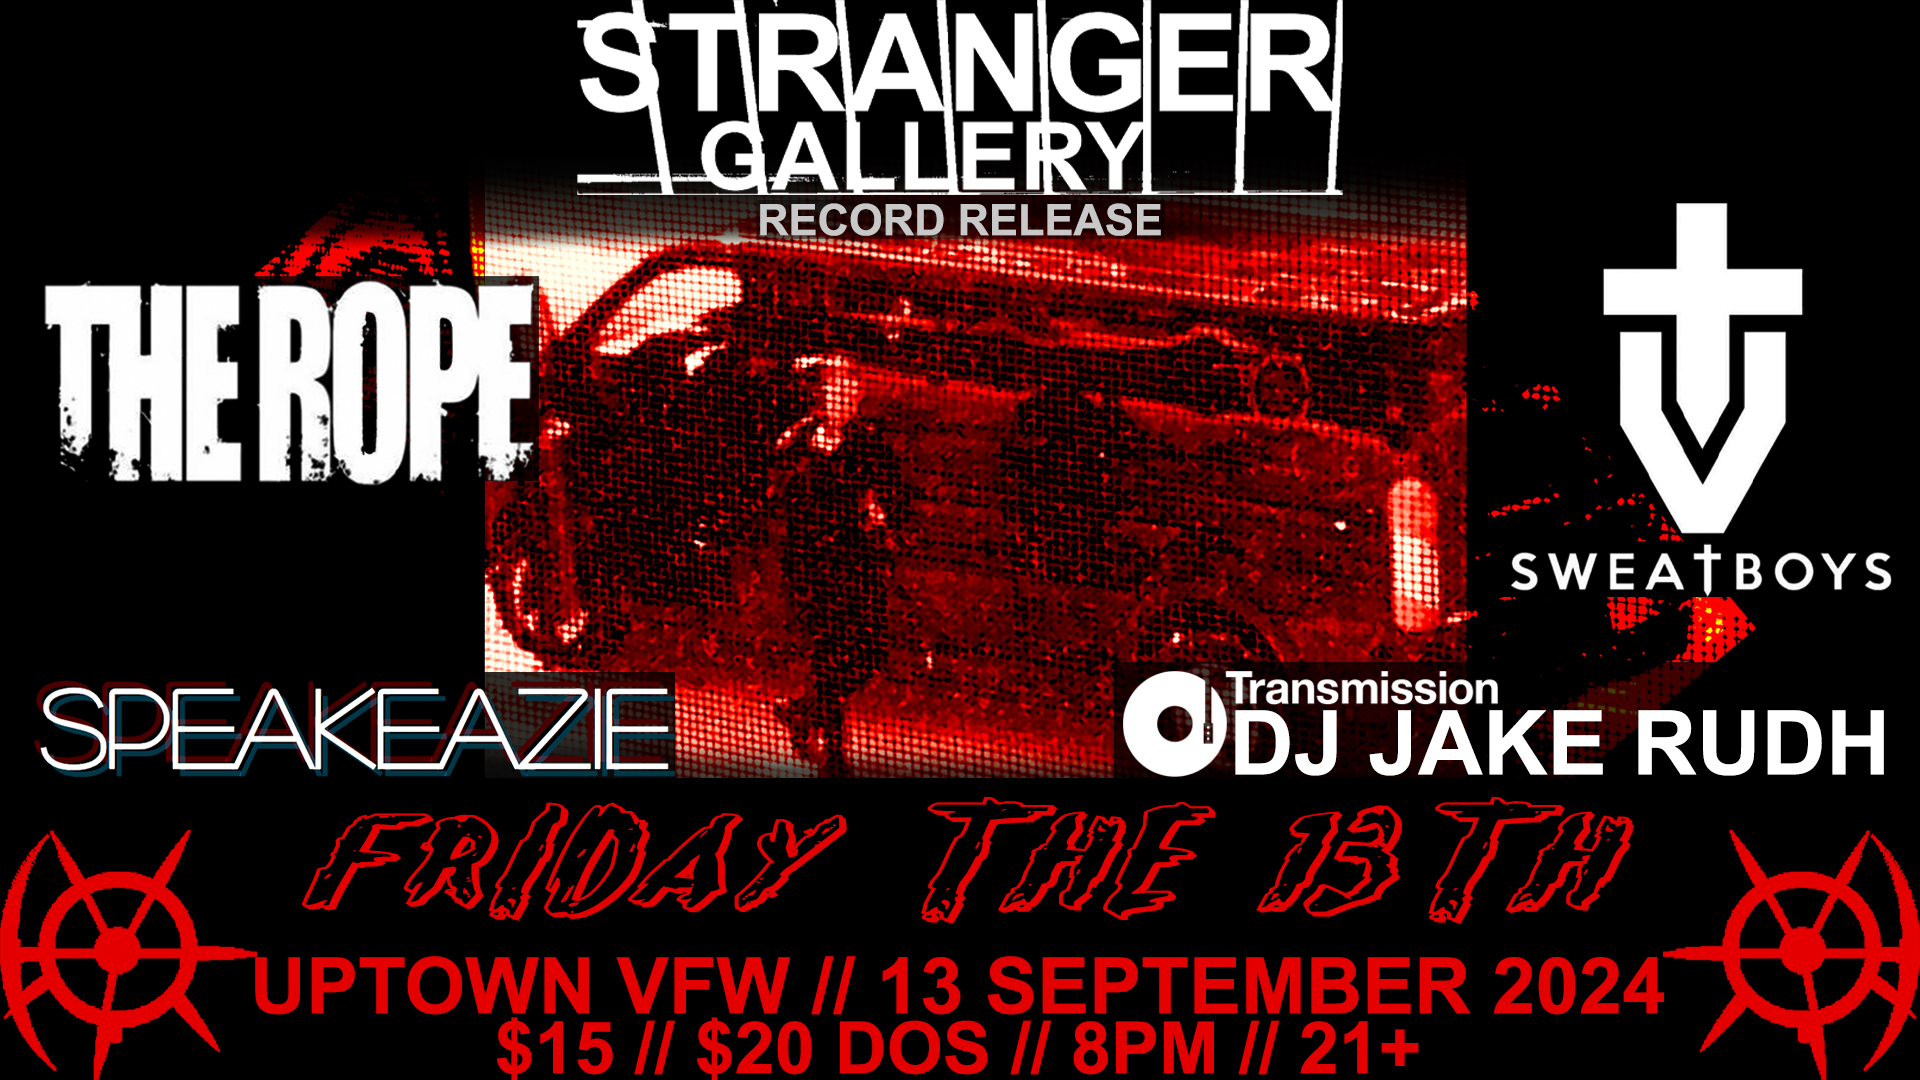 Stranger Gallery Record Release The Rope Sweatboys Speakeazie DJ Jake Rudh / Transmission Friday, September 13 James Ballentine "Uptown" VFW Post 246 Doors 8:00pm :: Music 8:00pm :: 21+ GA $15 ADV / $20 DOS NO REFUNDS Tickets On-Sale Now